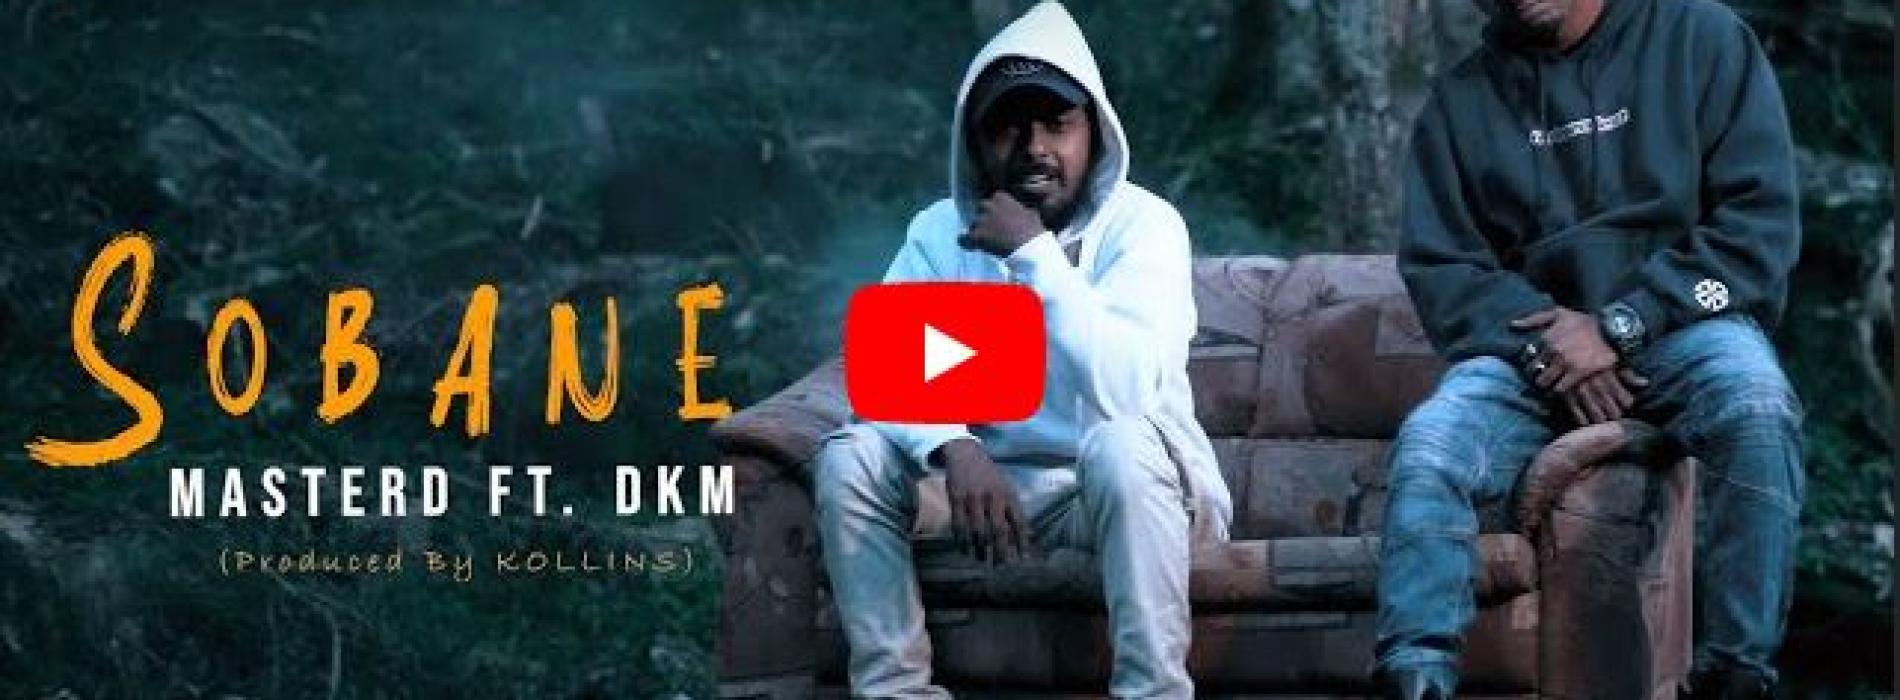 New Music : MasterD – Sobane (සෝබනේ) Ft DKM Produced by KOLLINS